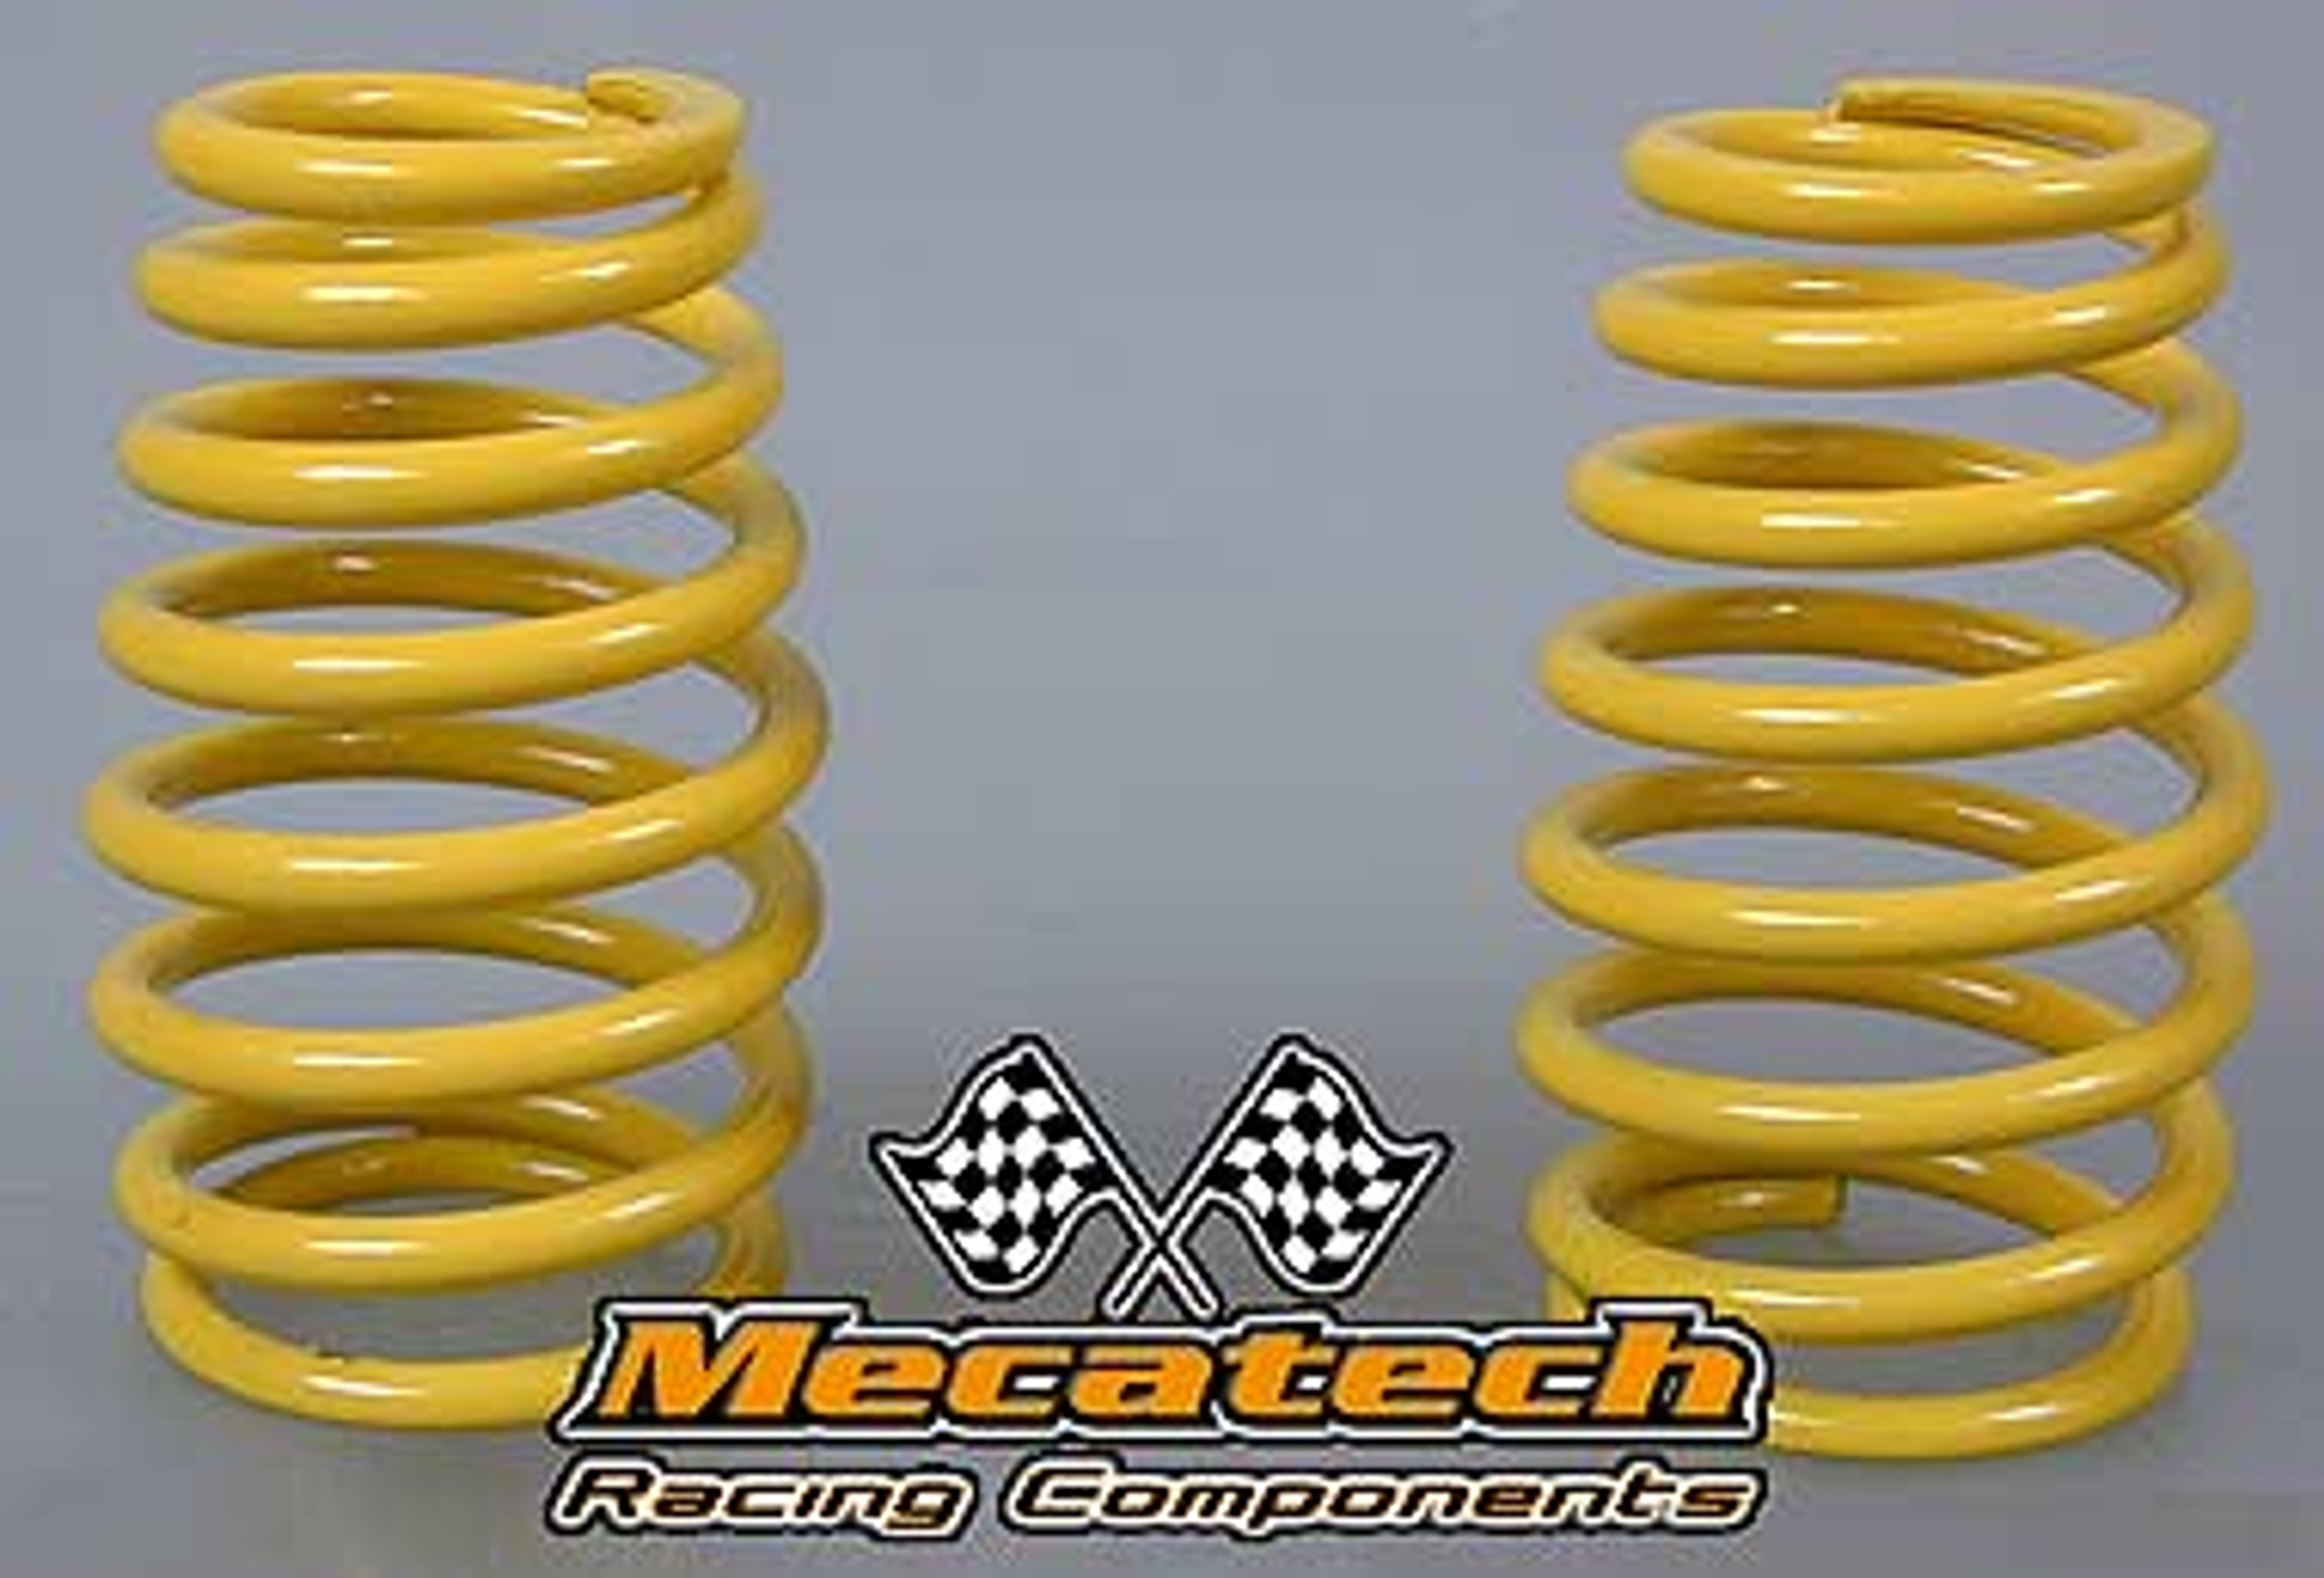 2009-04 Cask shaped springs for Mecatech Klick-Shocks, yellow 2,8 mm